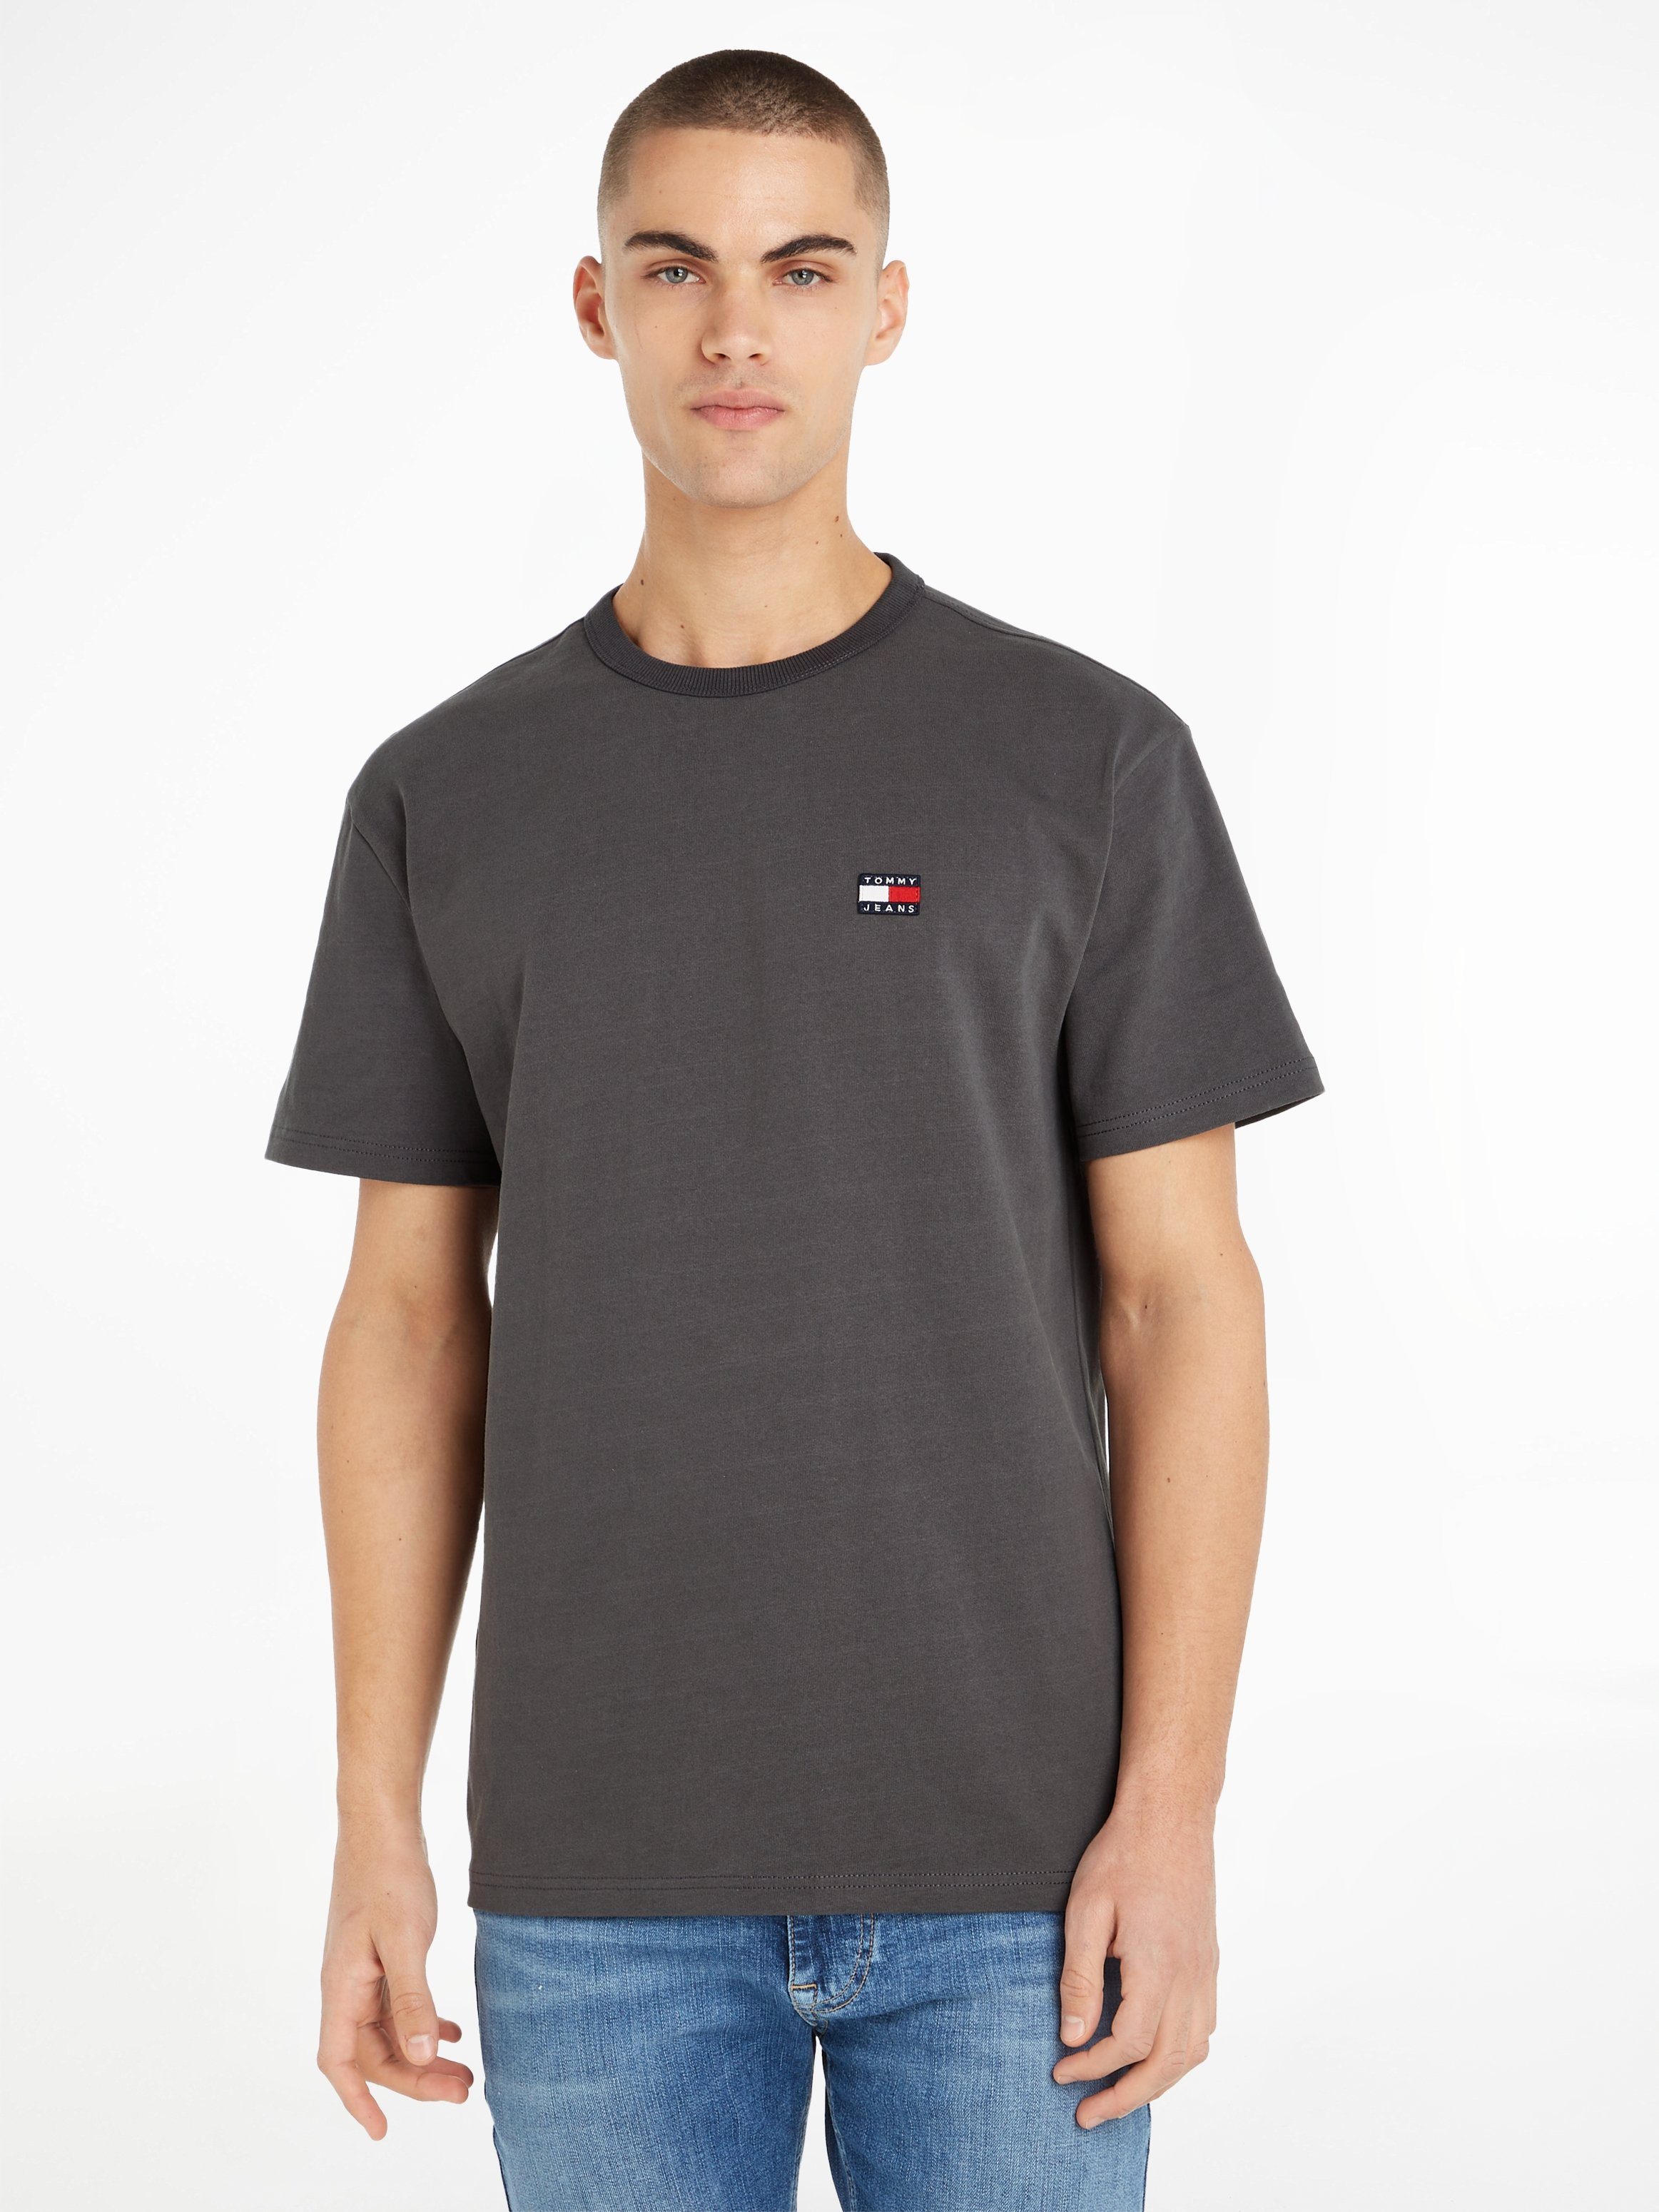 Tommy XS TEE BADGE T-Shirt Jeans TJM New Charcoal CLSC TOMMY